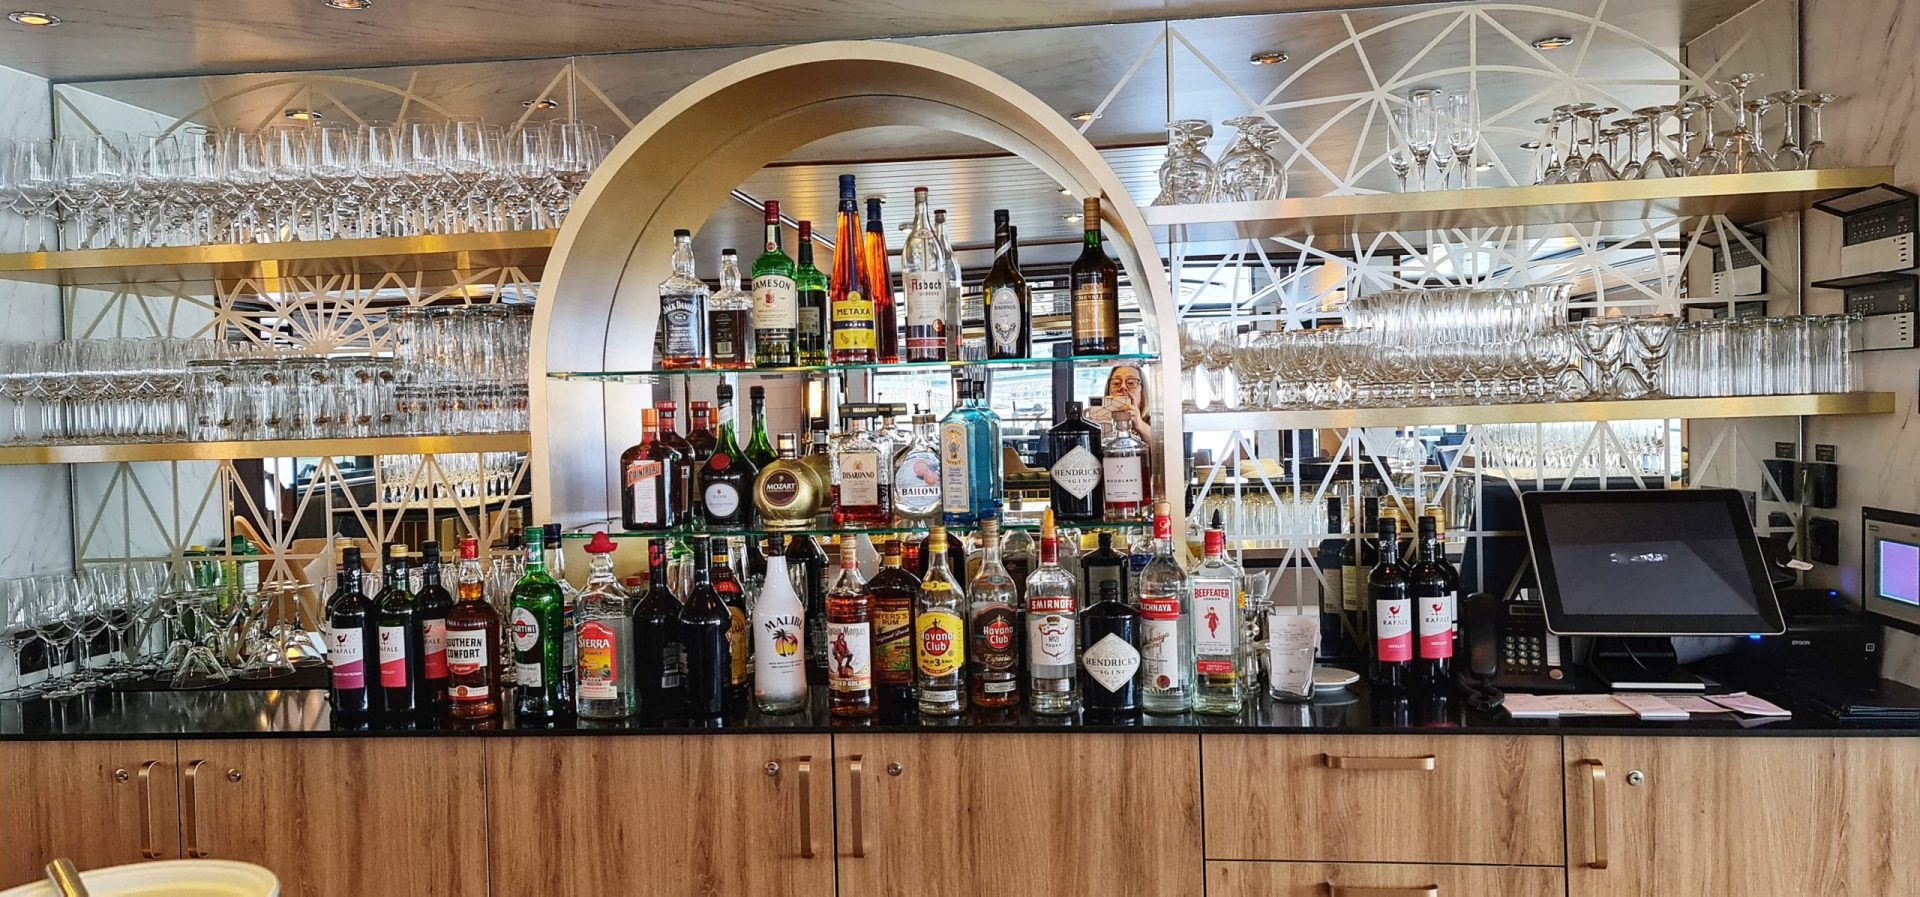 p&o cruise drinks prices 2023